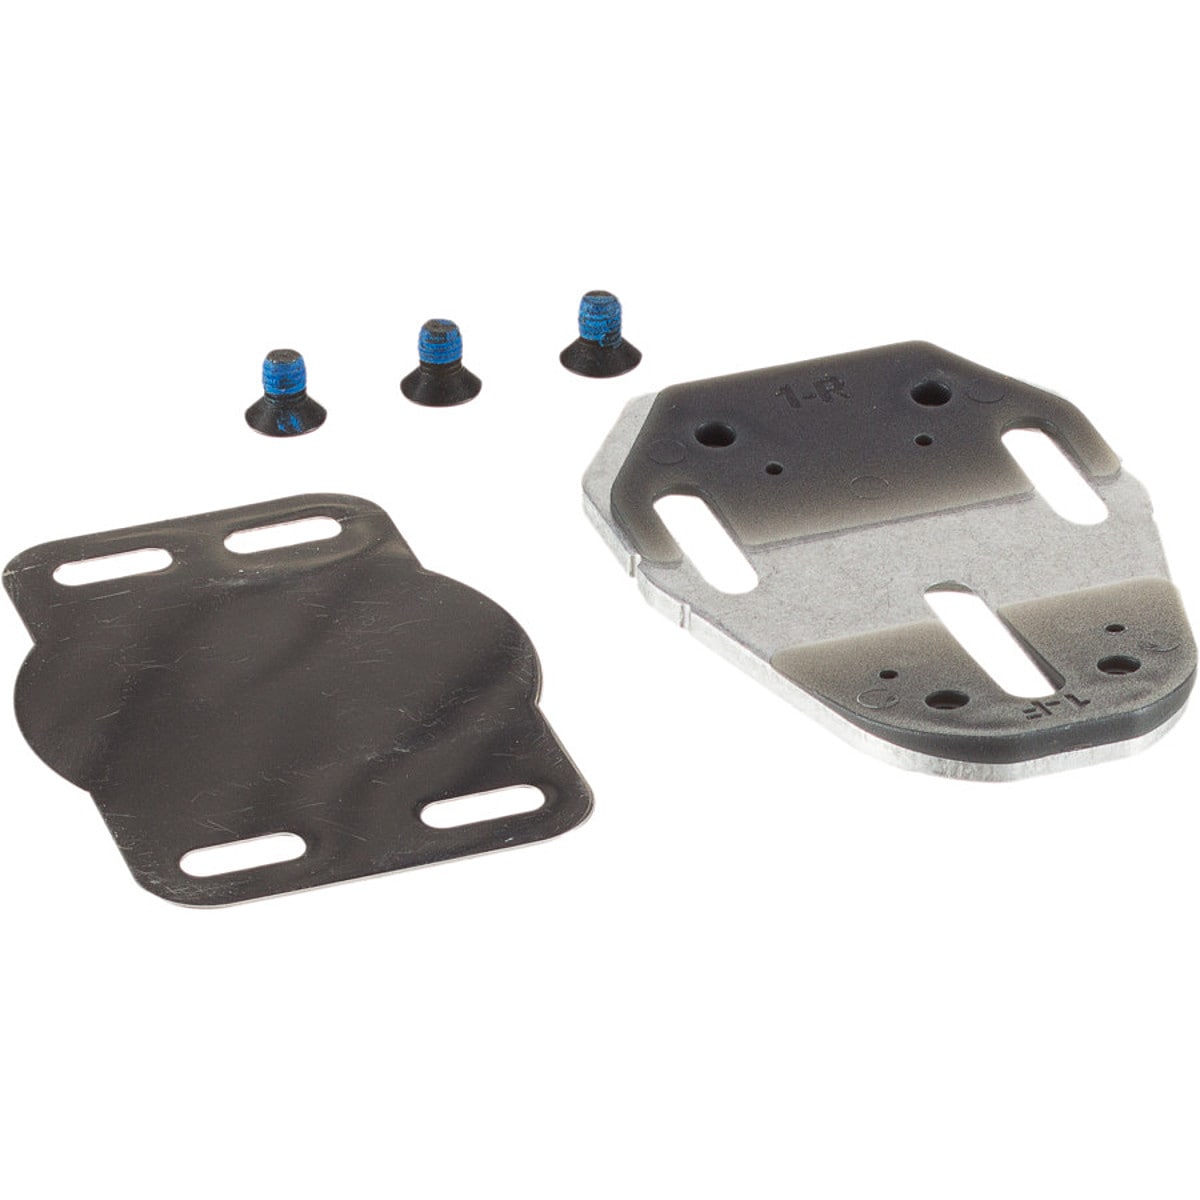 Speedplay Fore/Aft Extender Base Plate